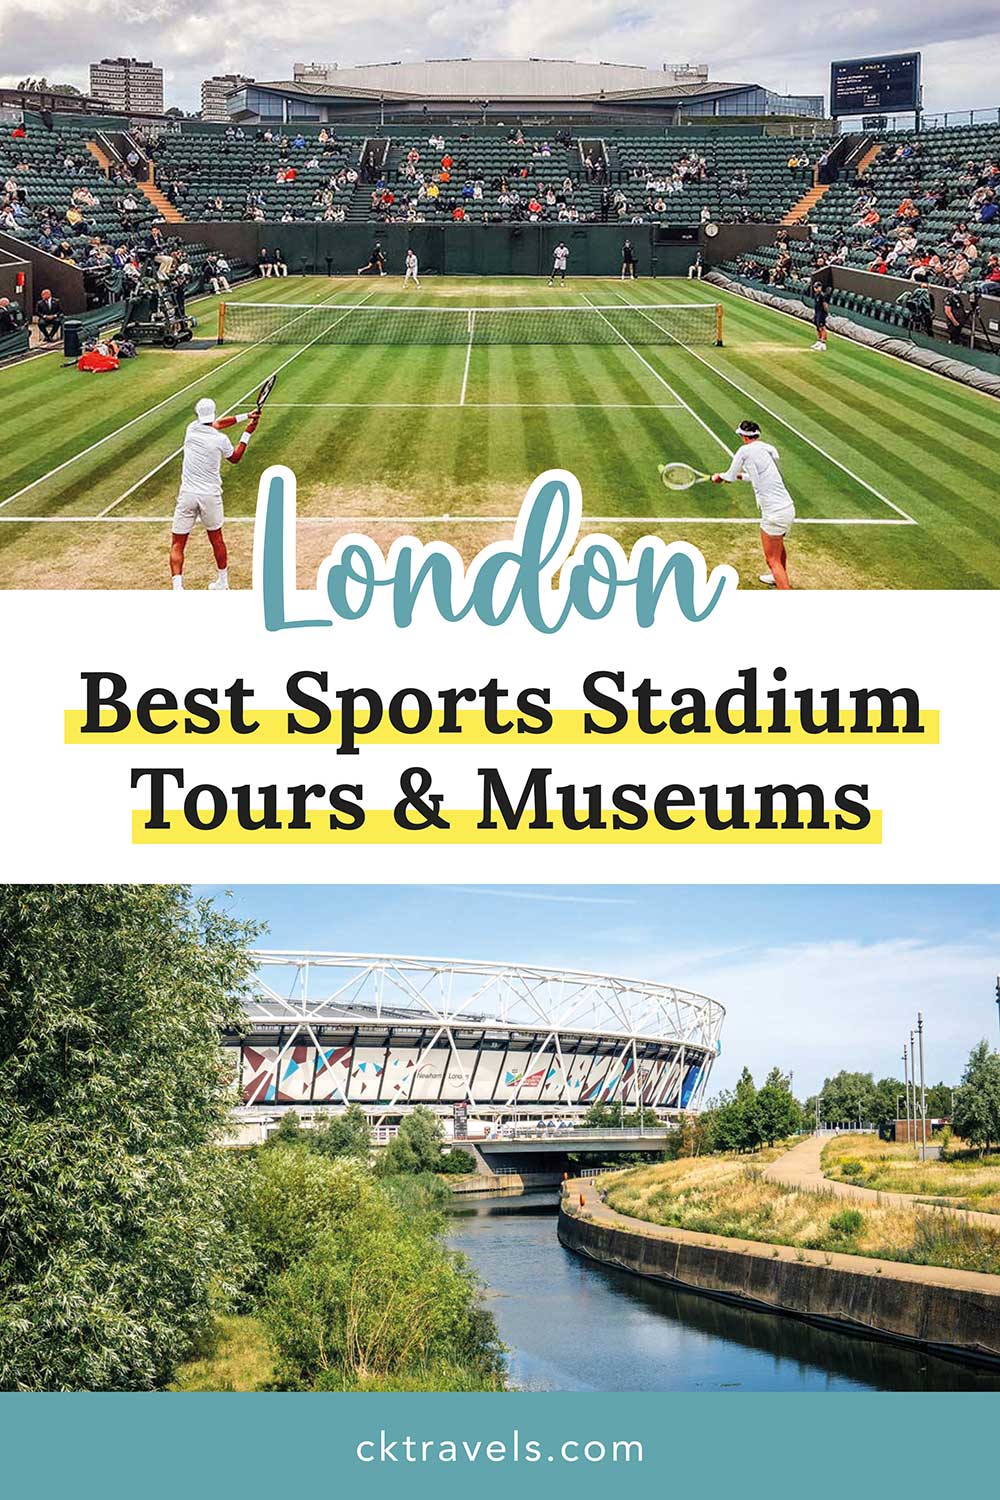 Sports stadium tours and museums in London